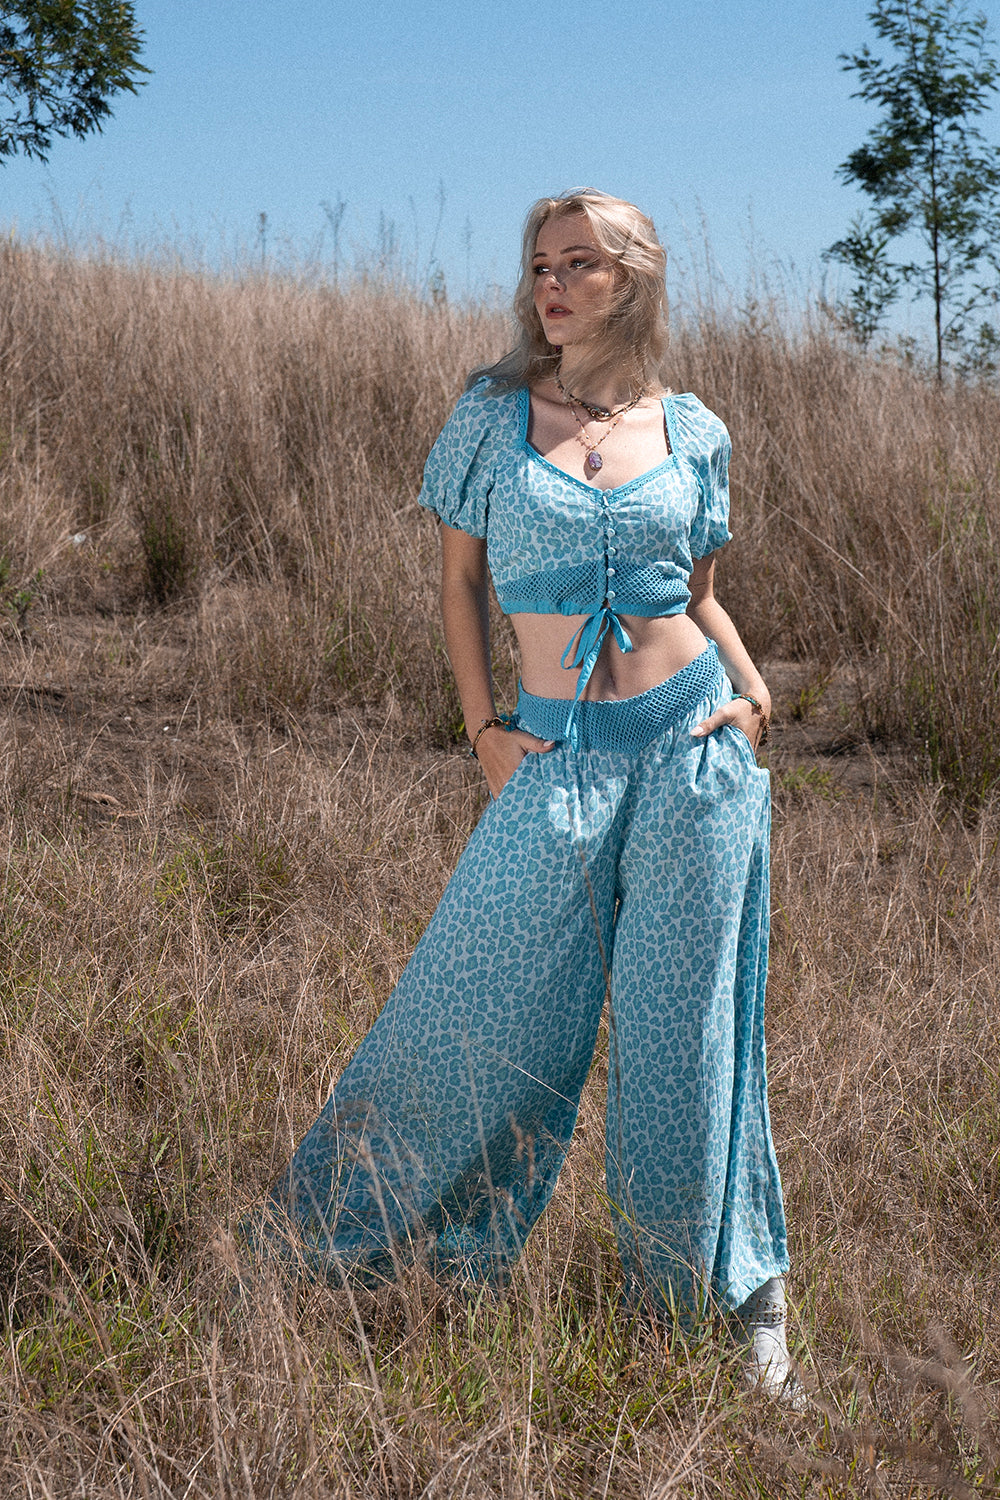 Clover Crop Top - Turquoise - Into the Wild by Tulle and Batiste